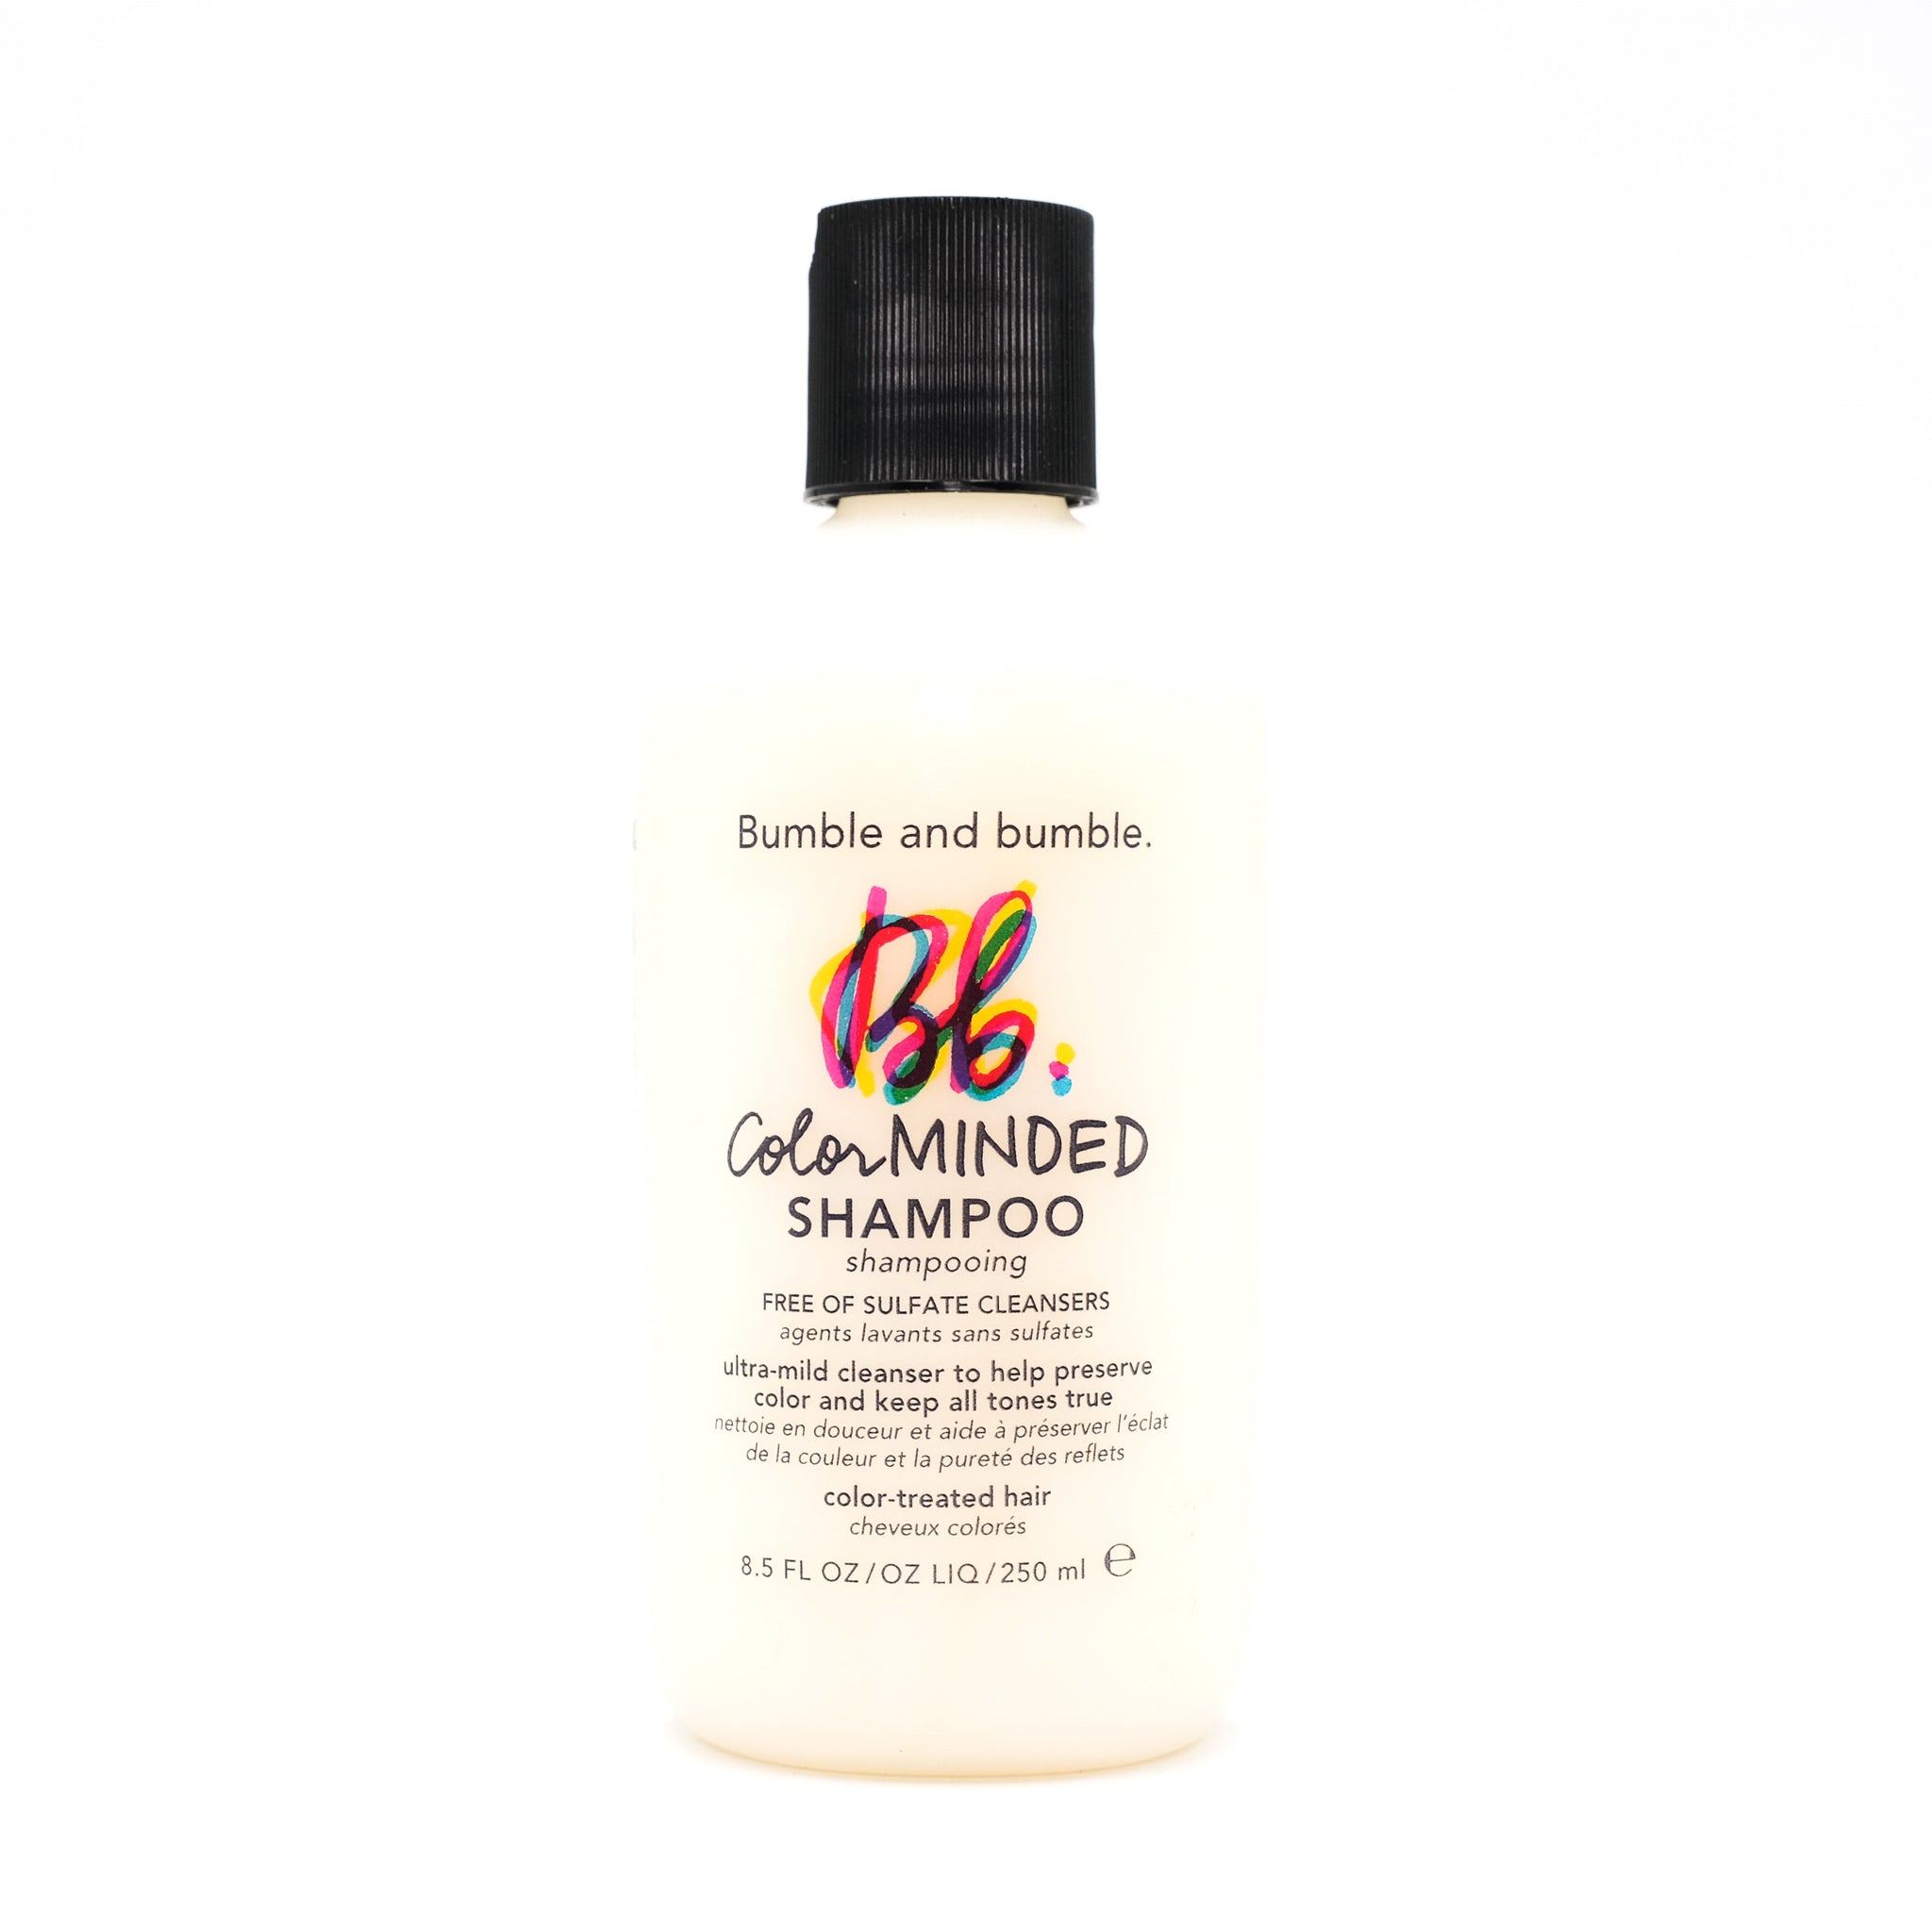 Bumble and bumble Bb. Color Minded Shampoo 8.5 oz